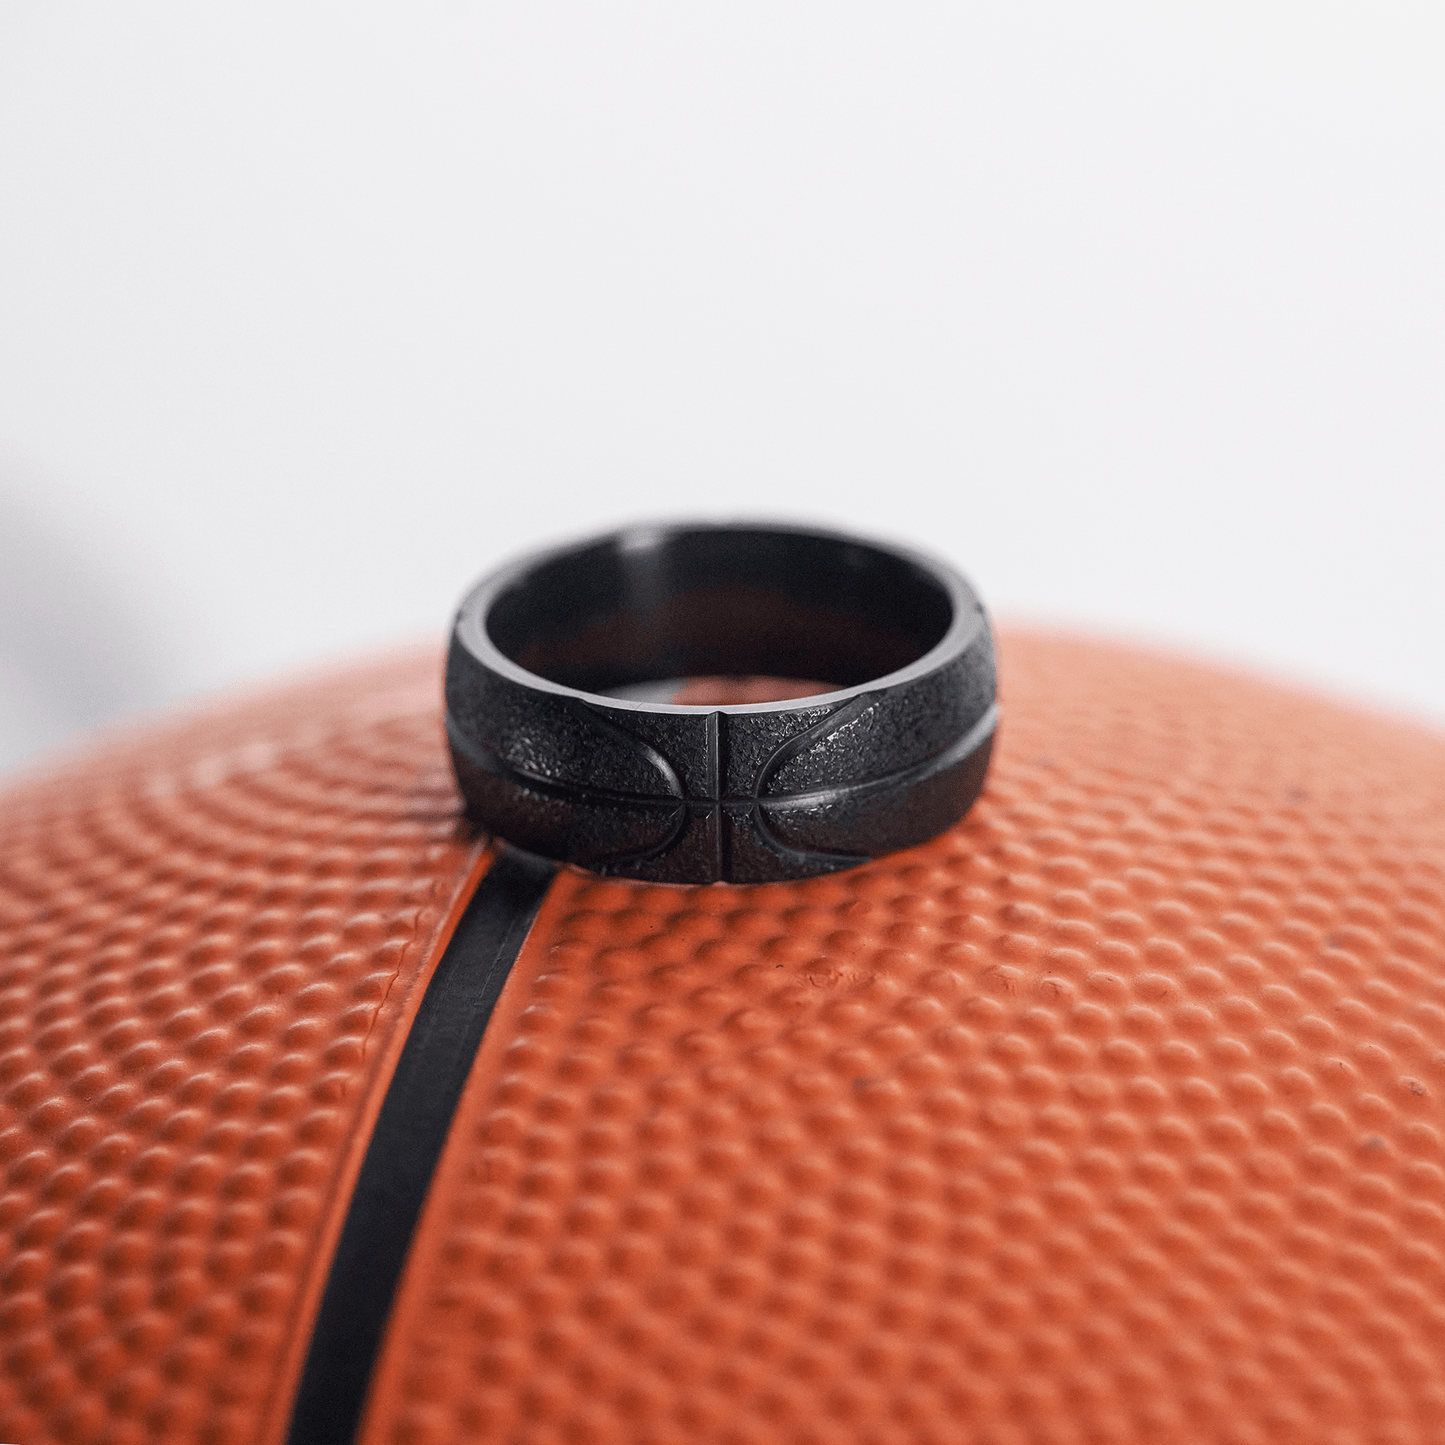 The Point Guard - Men's Wedding Rings - Manly Bands